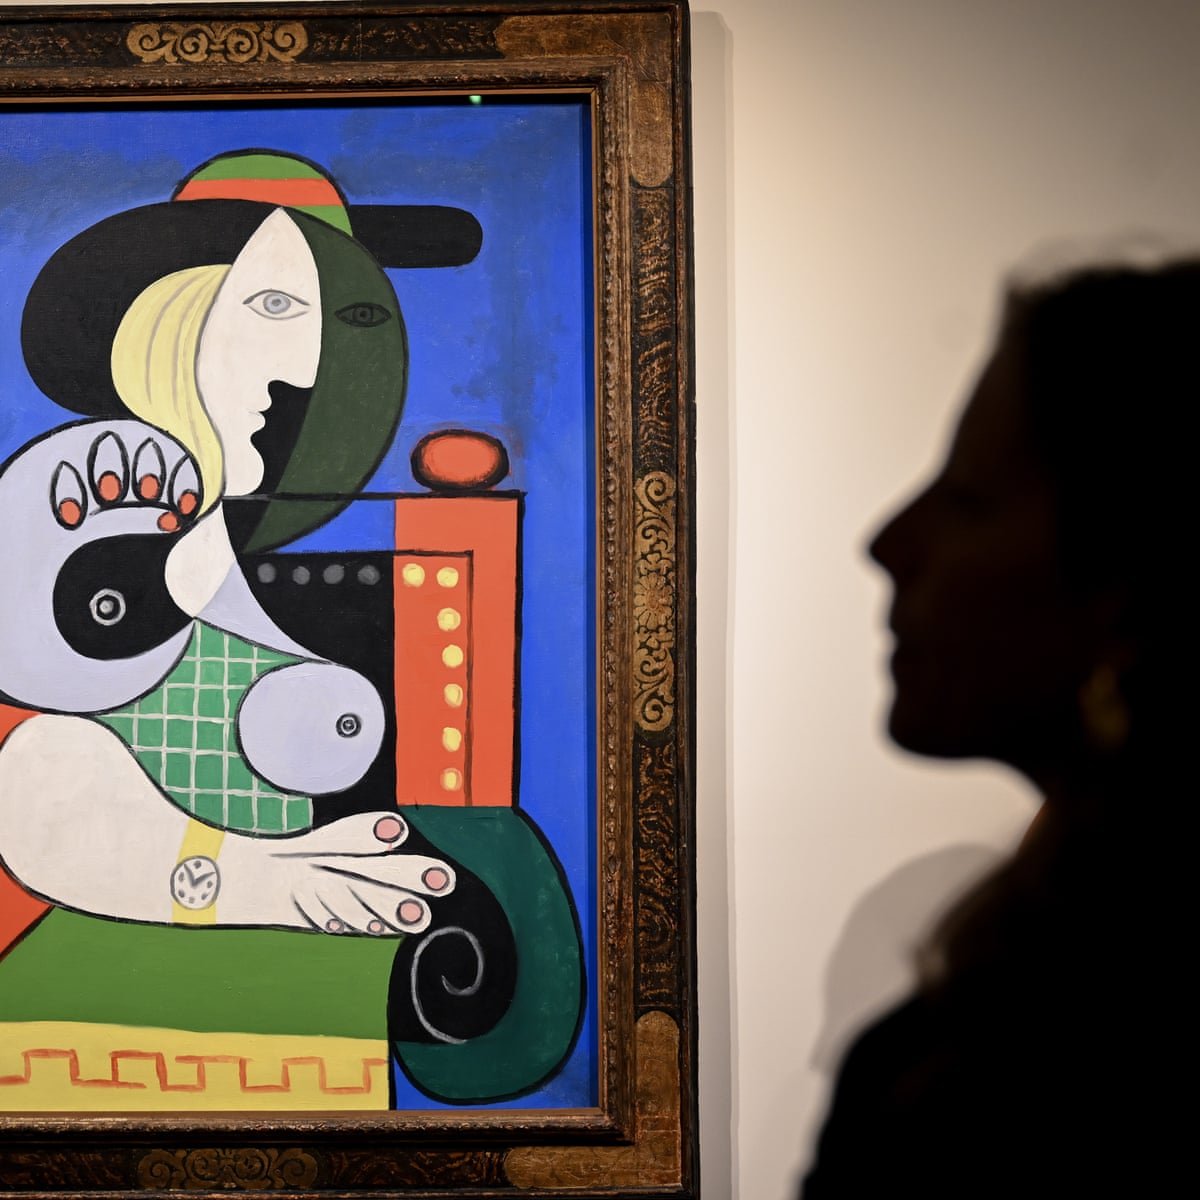 Painter Of The Night 114 Picasso masterpiece kicks off auction season forecast to sell $2.5bn in art  | Pablo Picasso | The Guardian